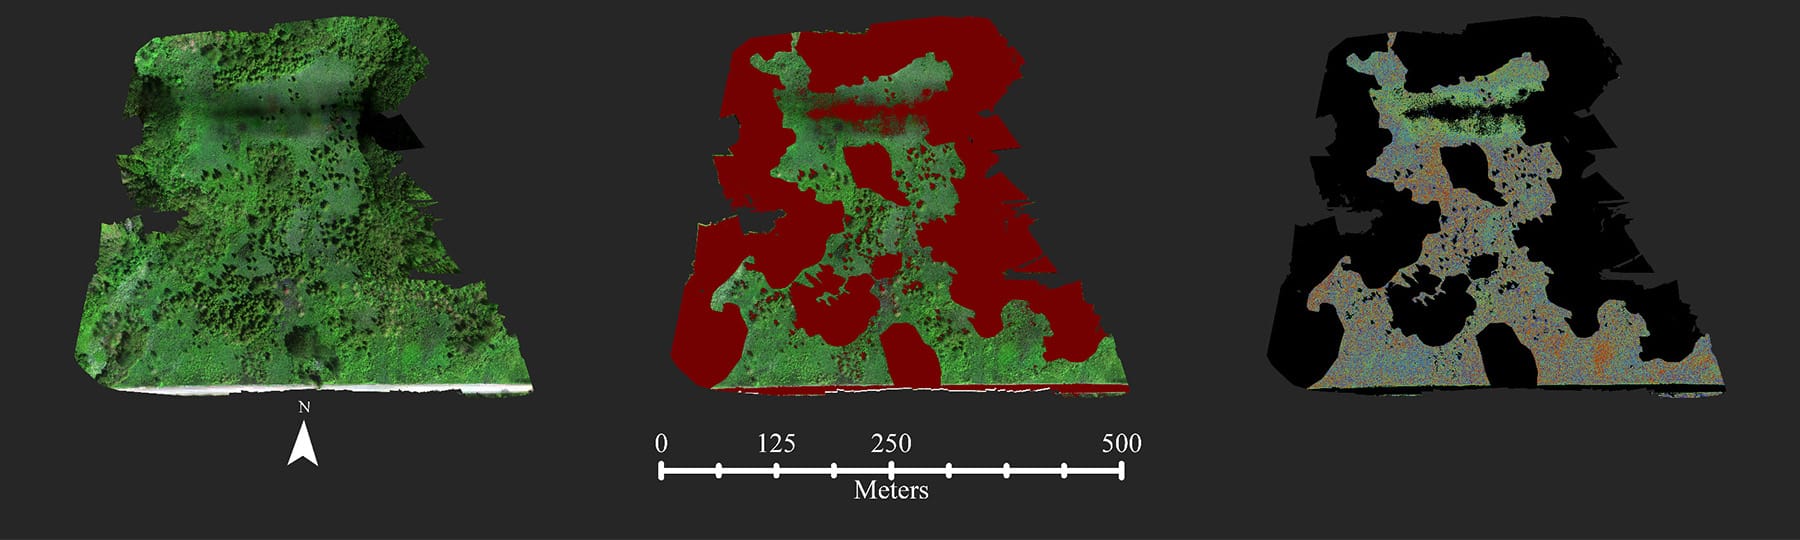 Three geospatial images in green, red and green, and black and grey with a scale labeled Meters.